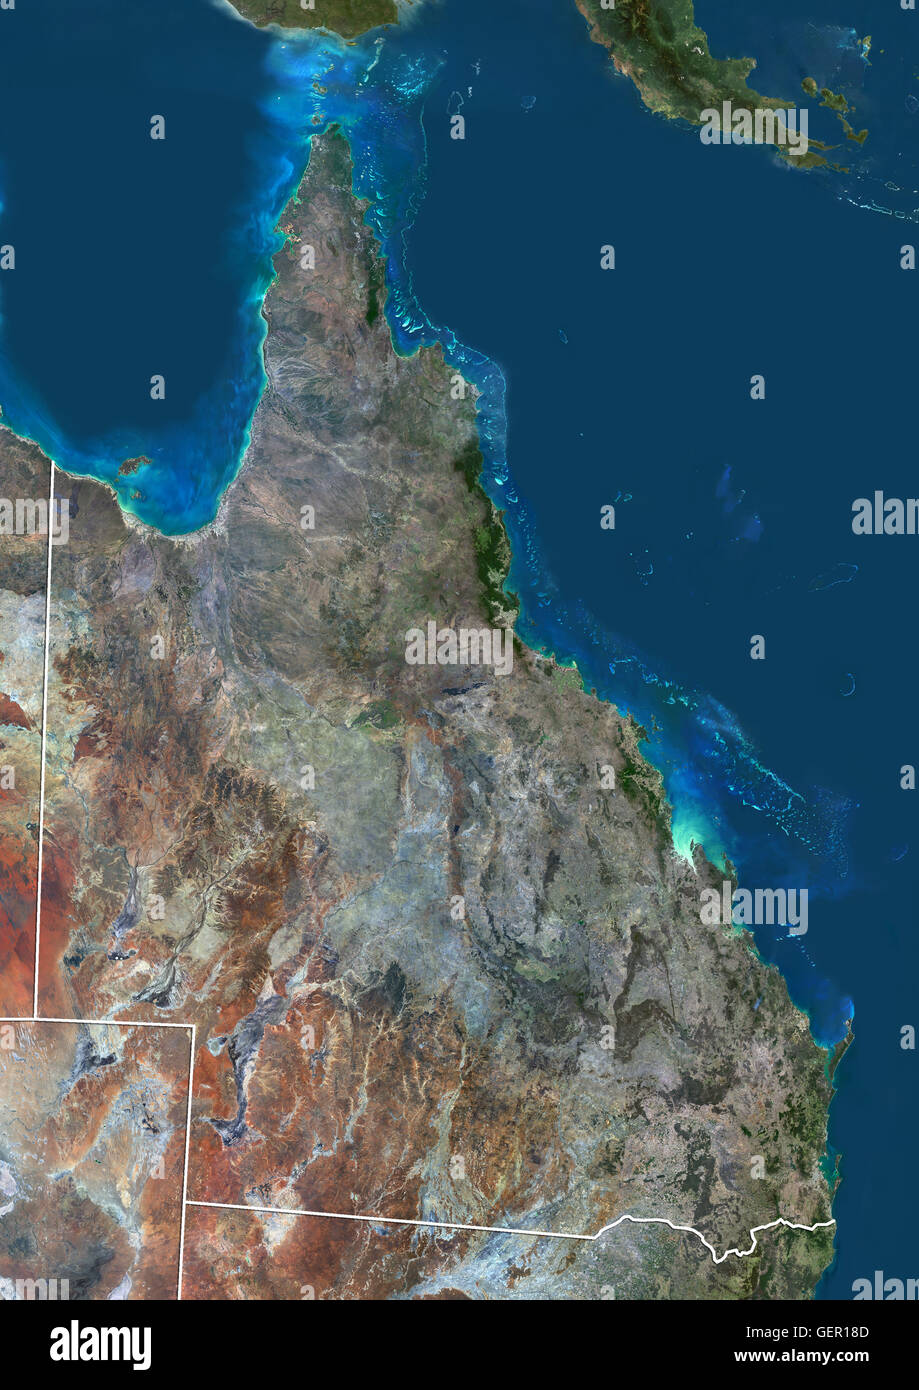 Satellite view of Queensland, Australia (with administrative boundaries). The Great Barrier Reef extends along most of Queensland's coastline. This image was compiled from data acquired by Landsat 8 satellite in 2014. Stock Photo